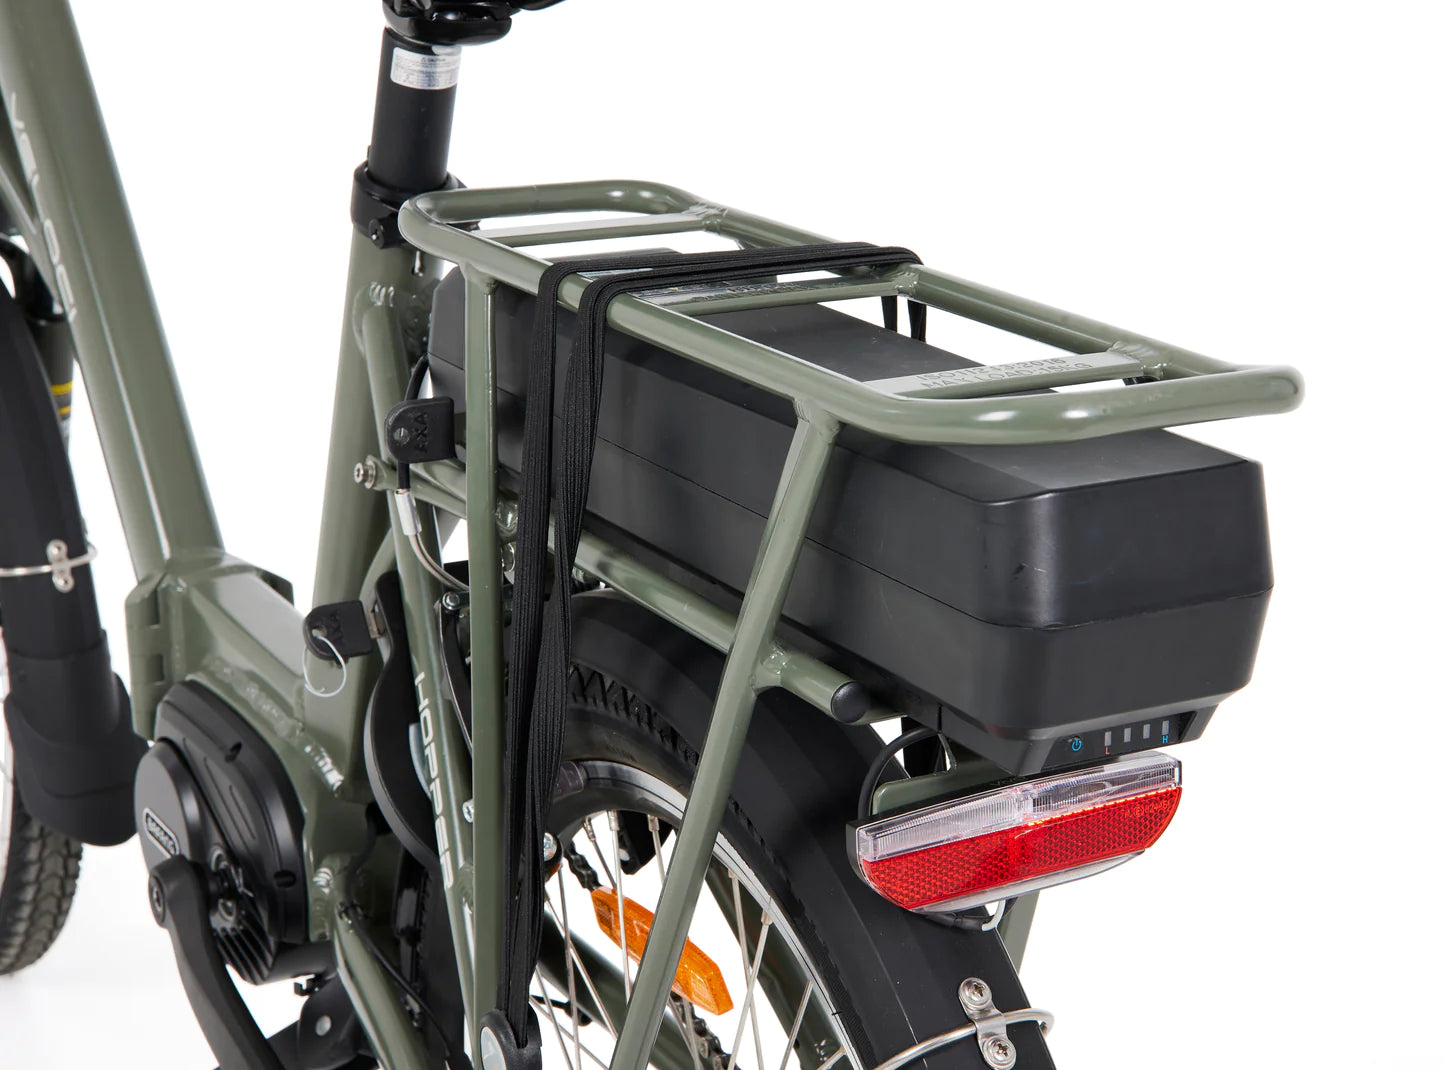 A product image of the Veloci Hopper folding electric bike from LeaseBike by Bleeper, showing a close-up of the rear carrier rack and the removable electric battery which can be locked in position with a key.